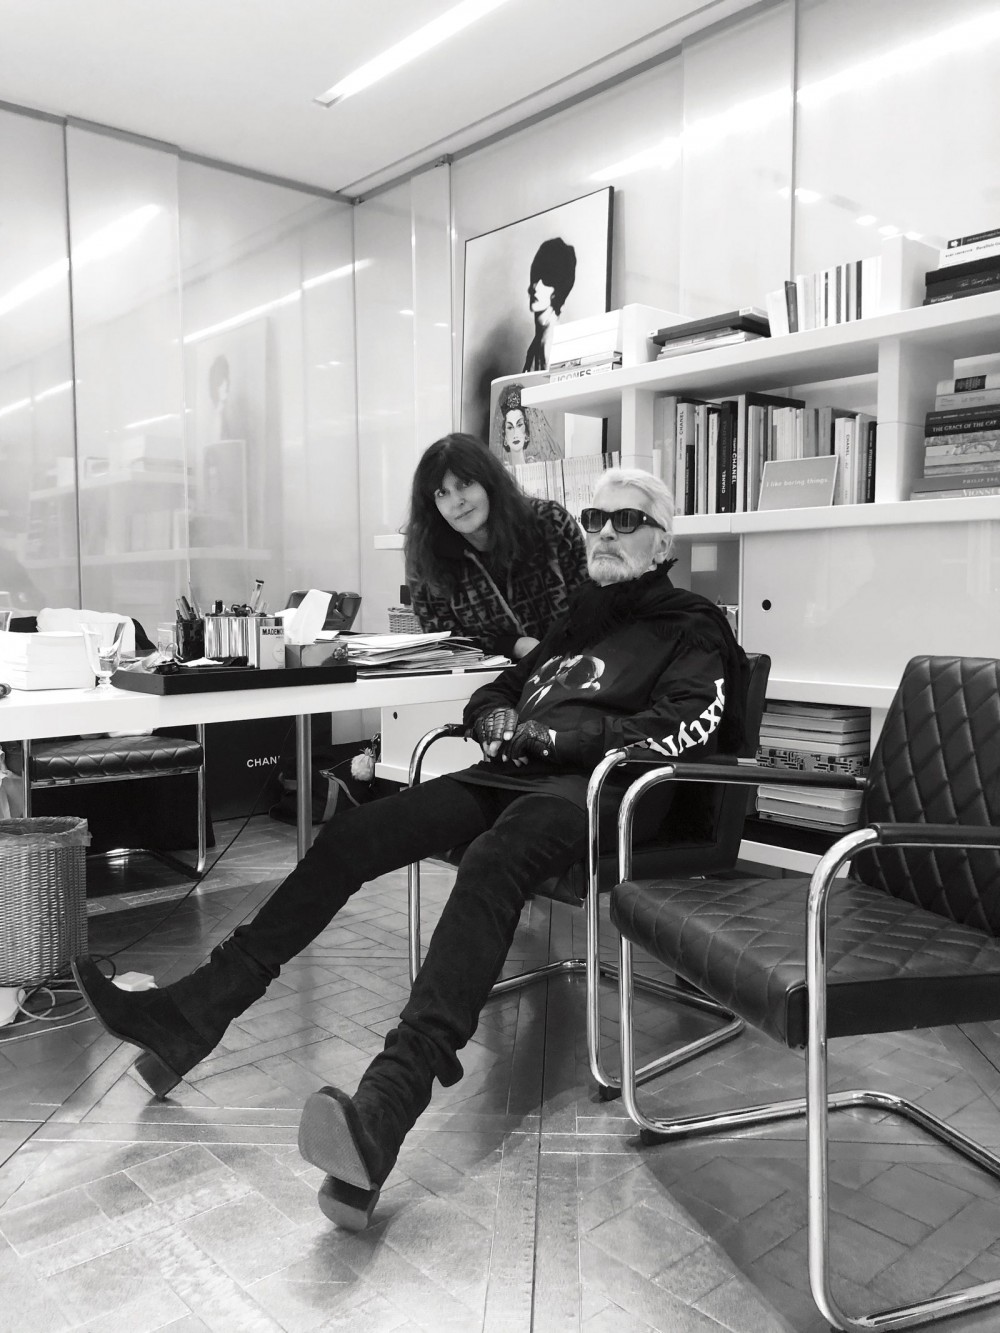 Viard and the late Karl Lagerfeld whom she first joined at Chanel as a studio intern in 1987.